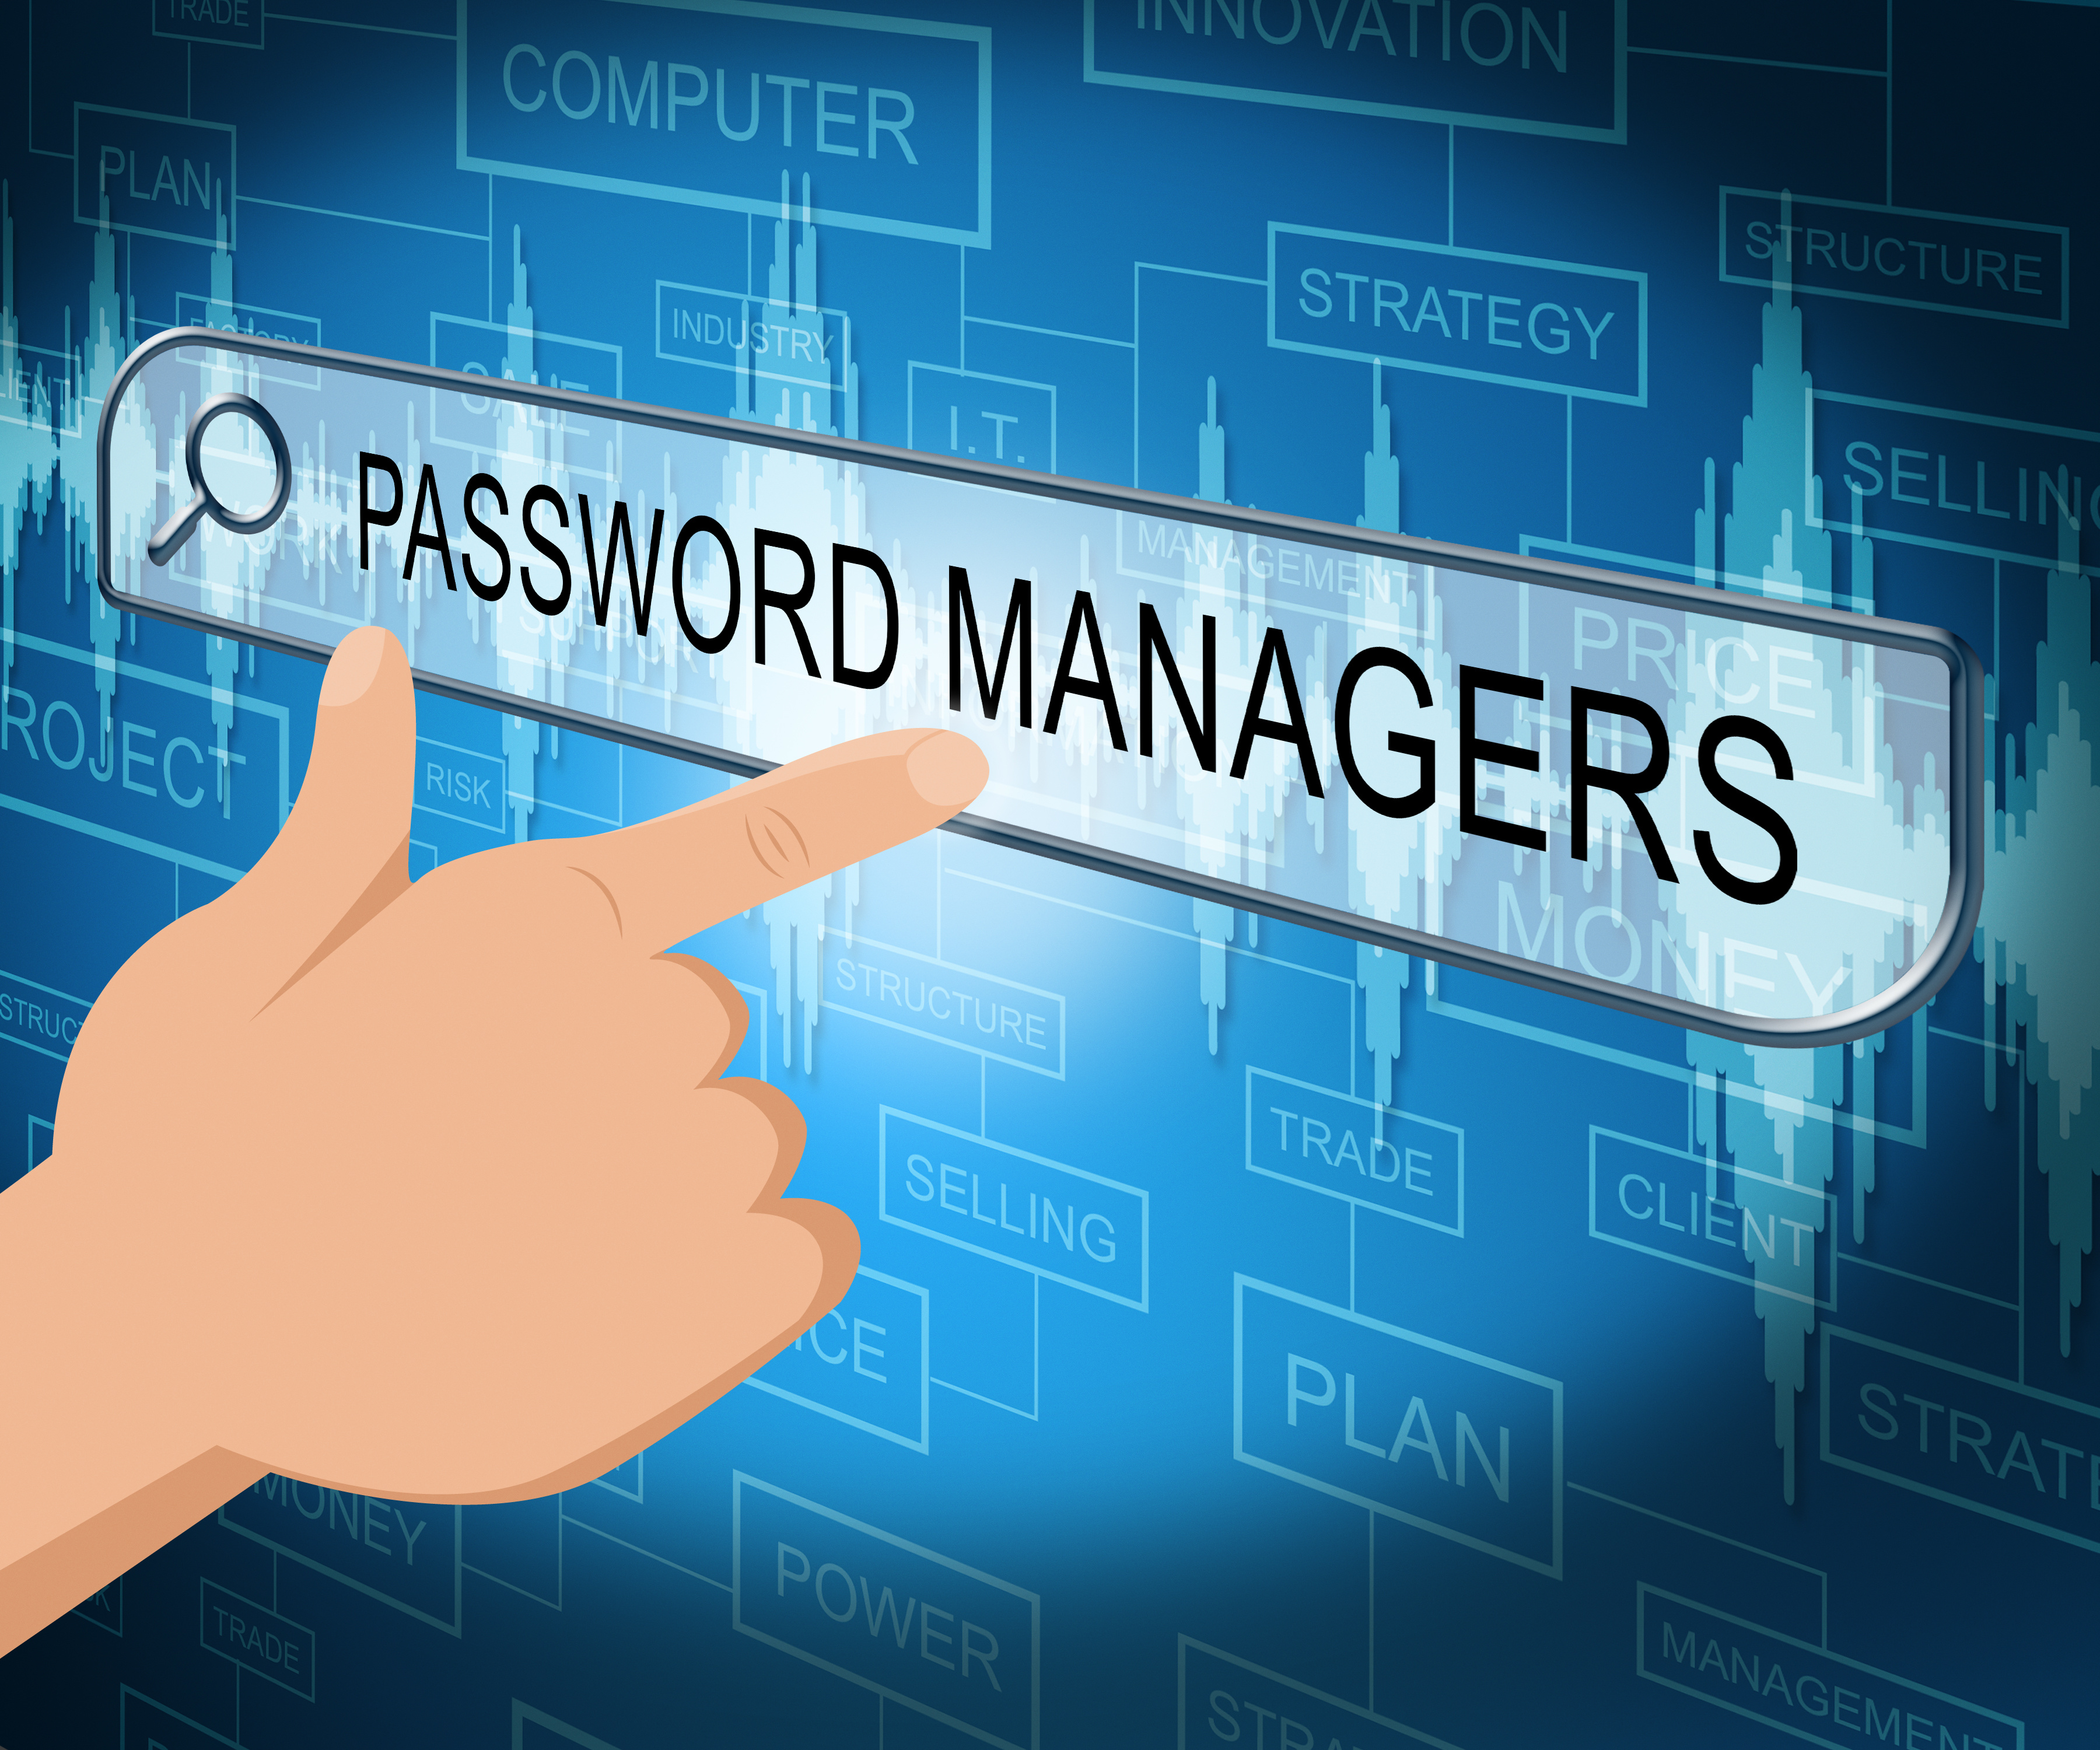 Password Managers